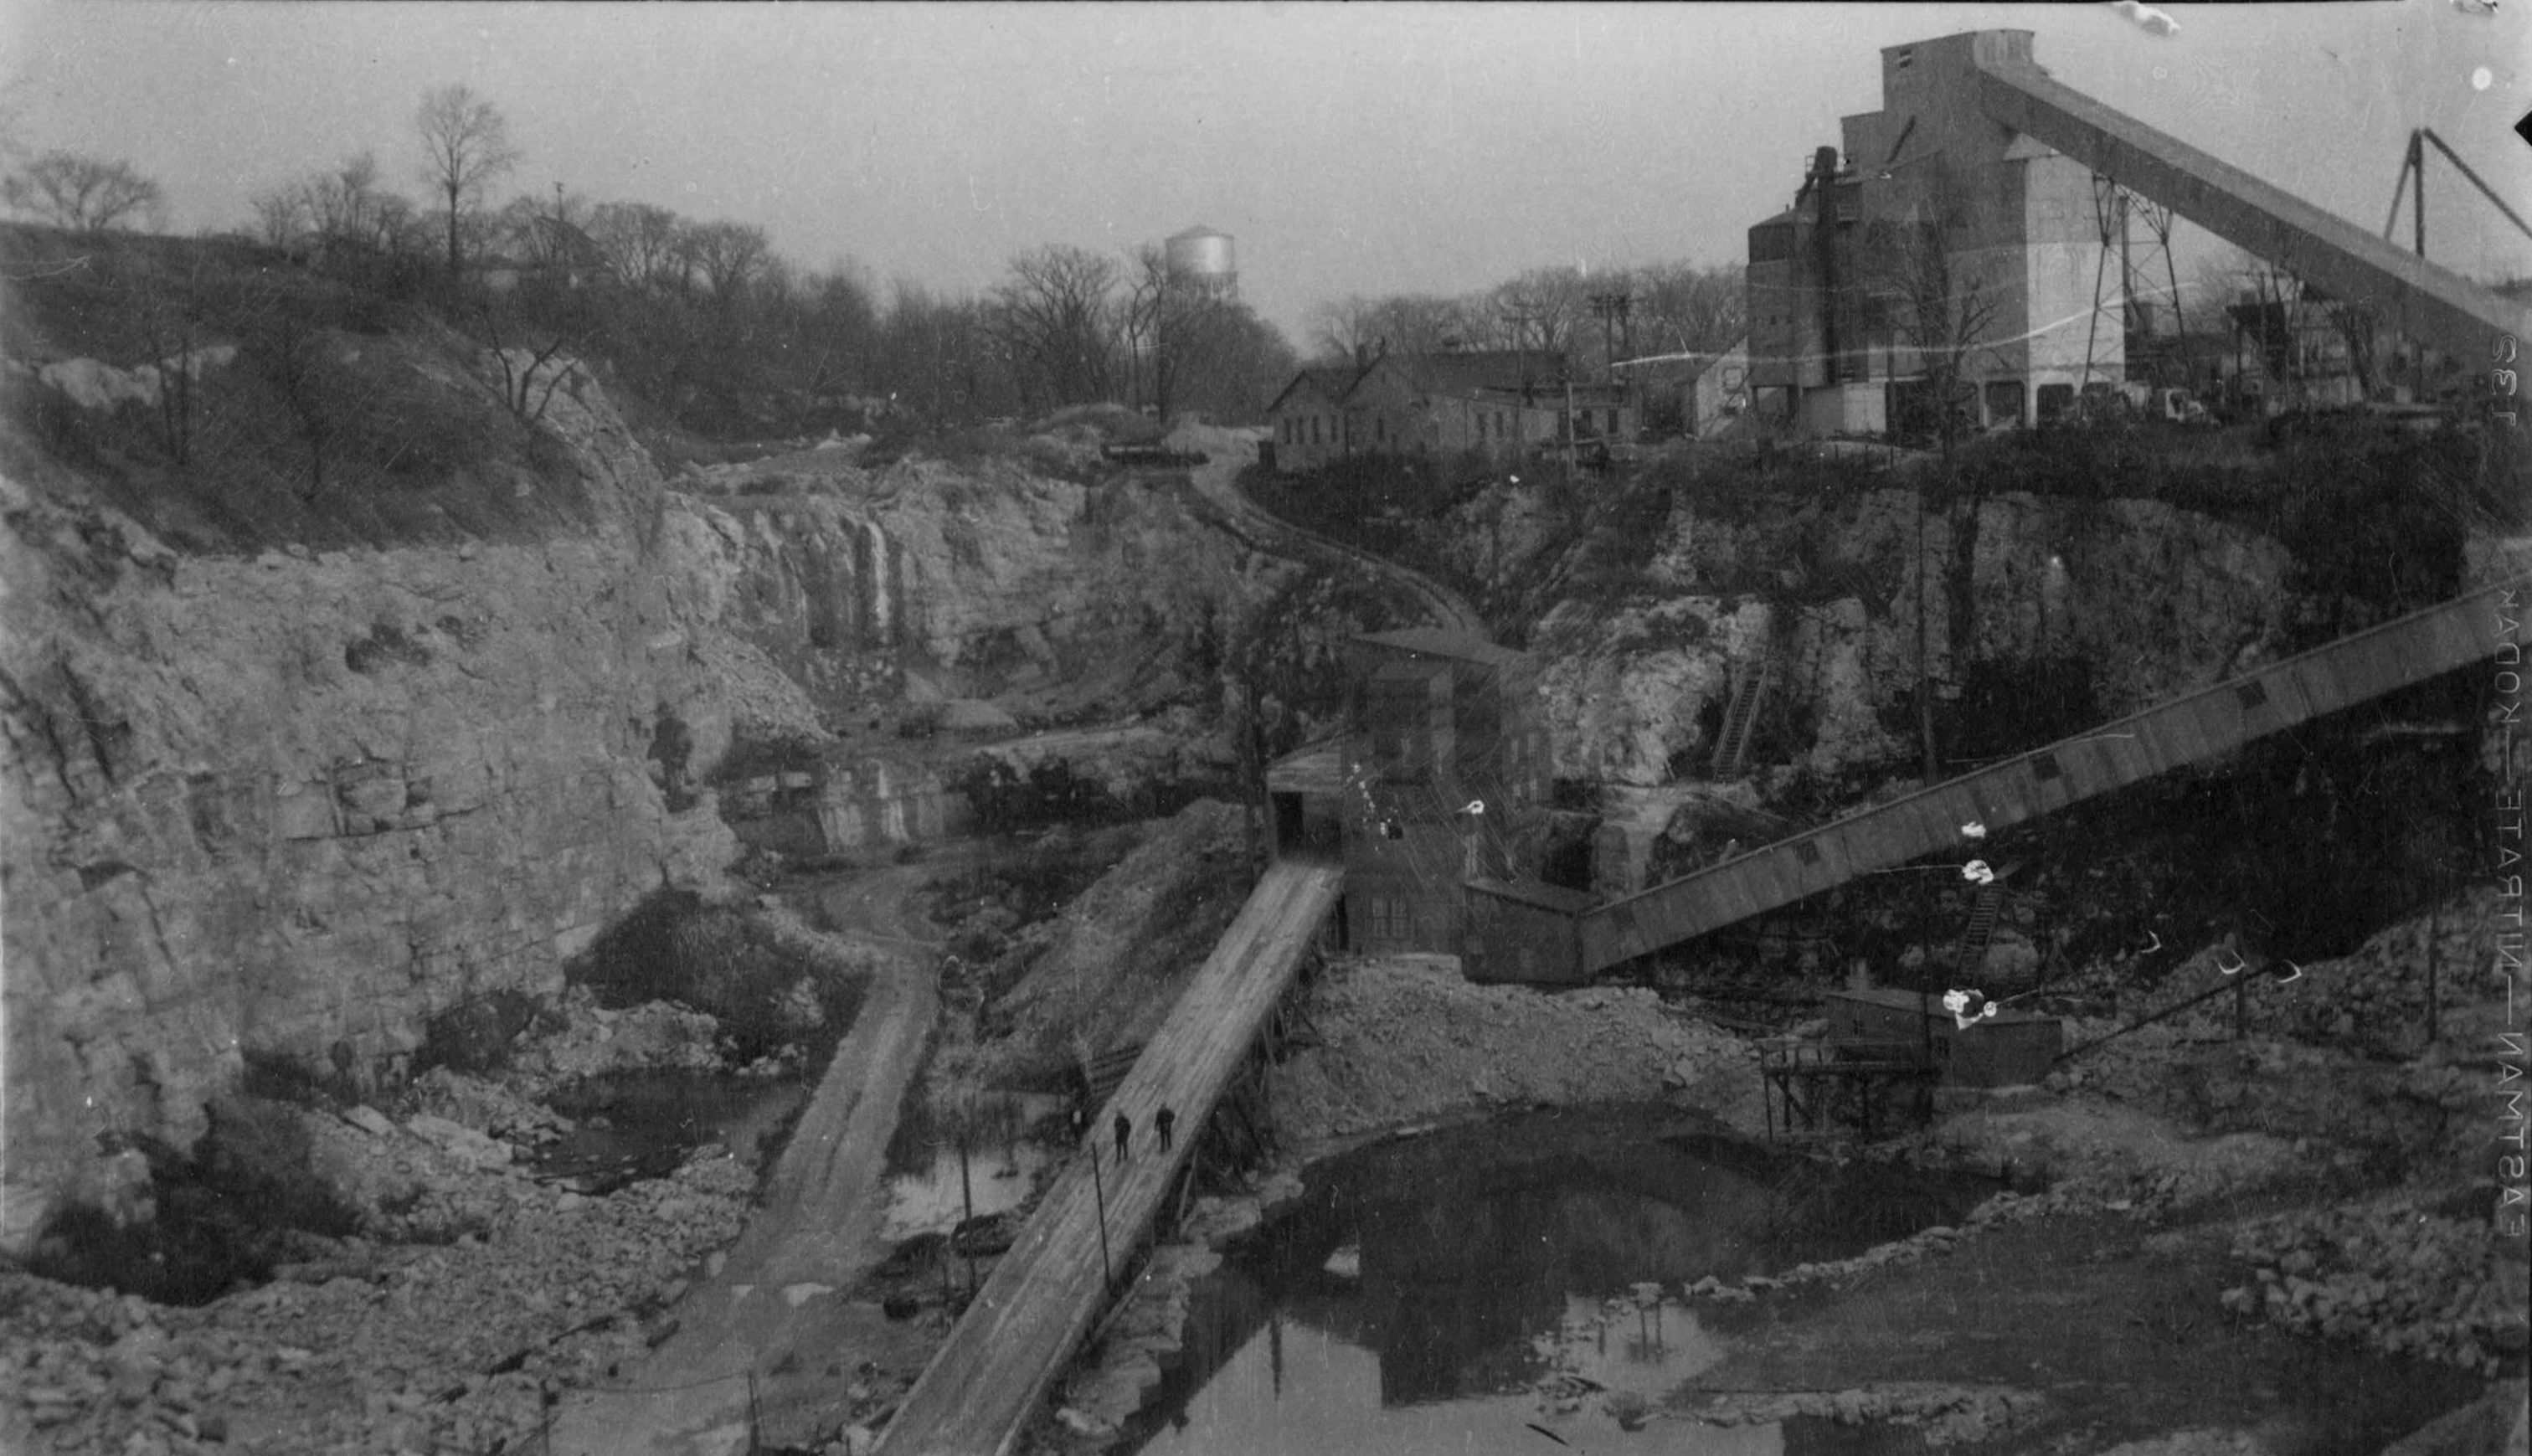 This Certified Concrete quarry facility, pictured here in 1934, was once located on the north side of State Street, east of N. 68th Street. The company used crushed stone to make concrete. 